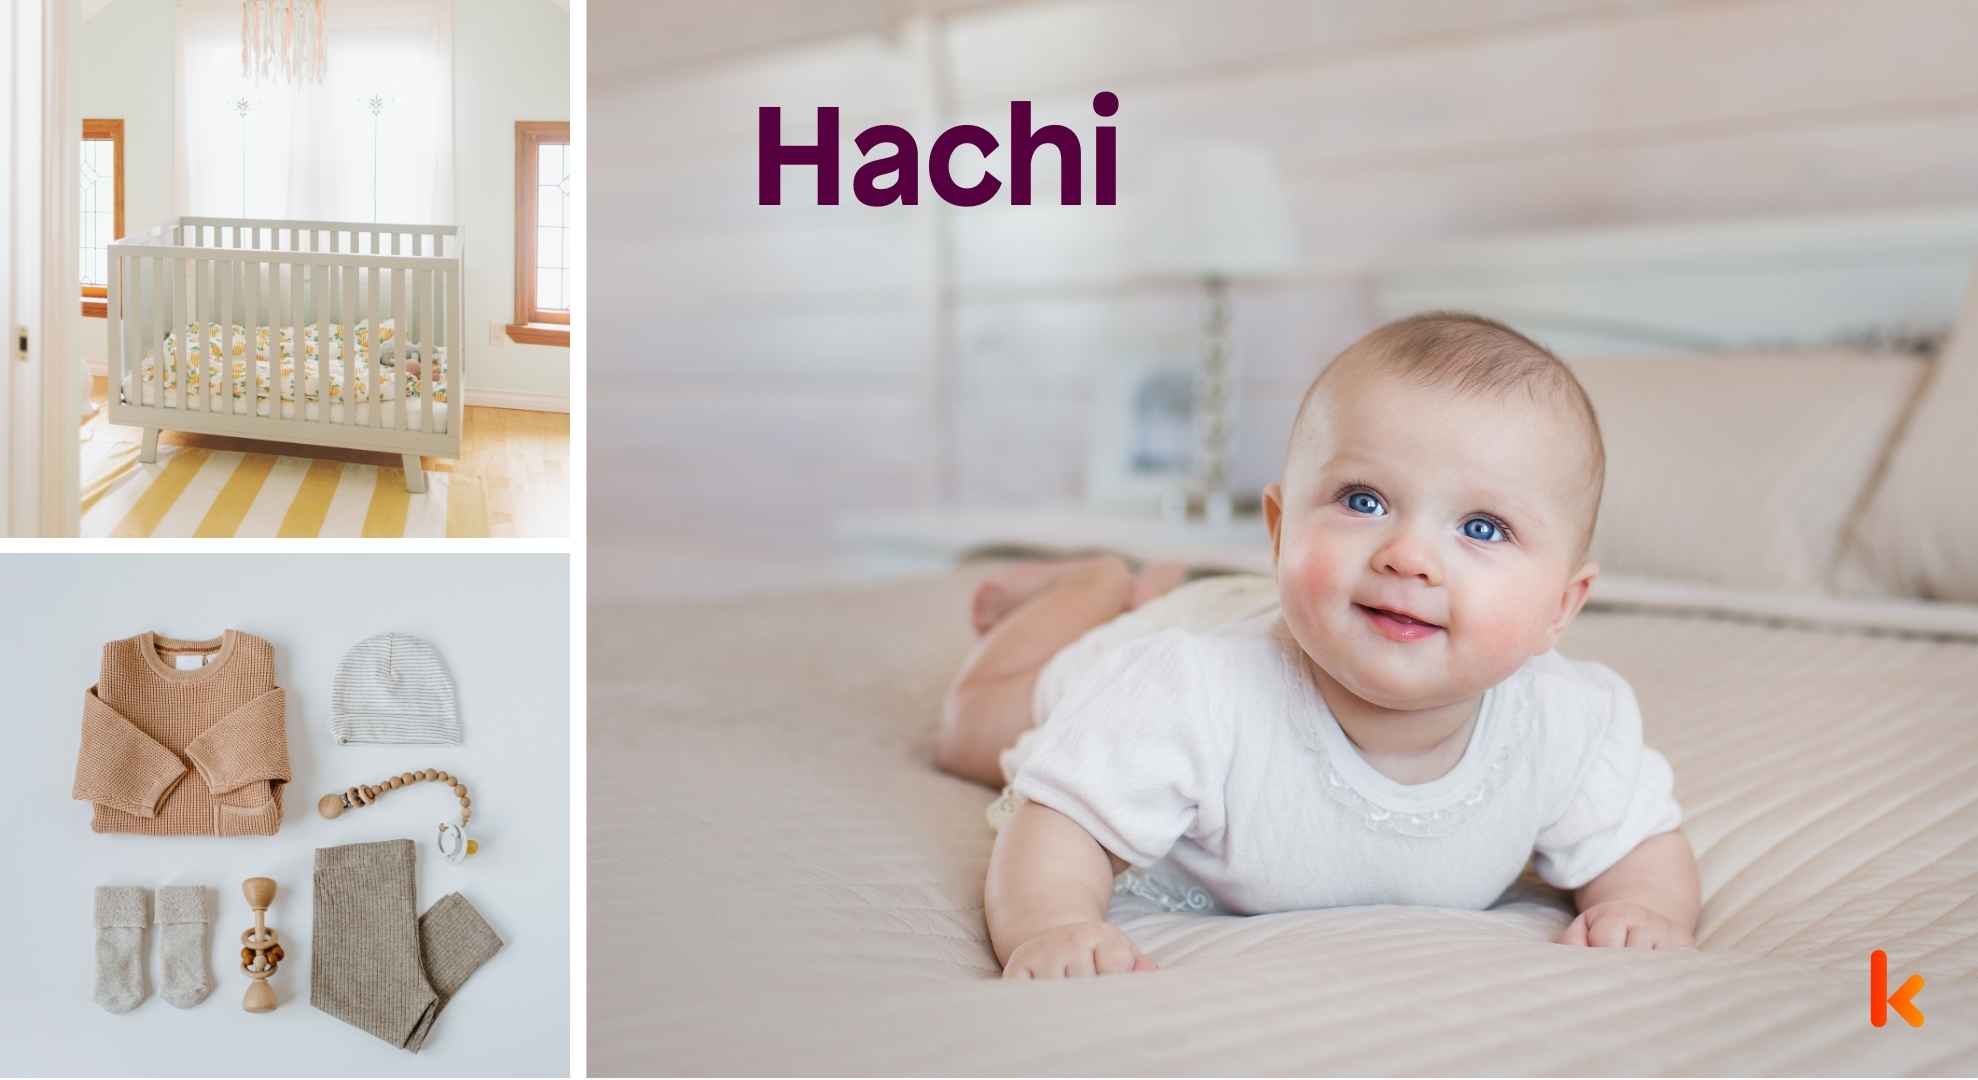 Meaning of the name Hachi